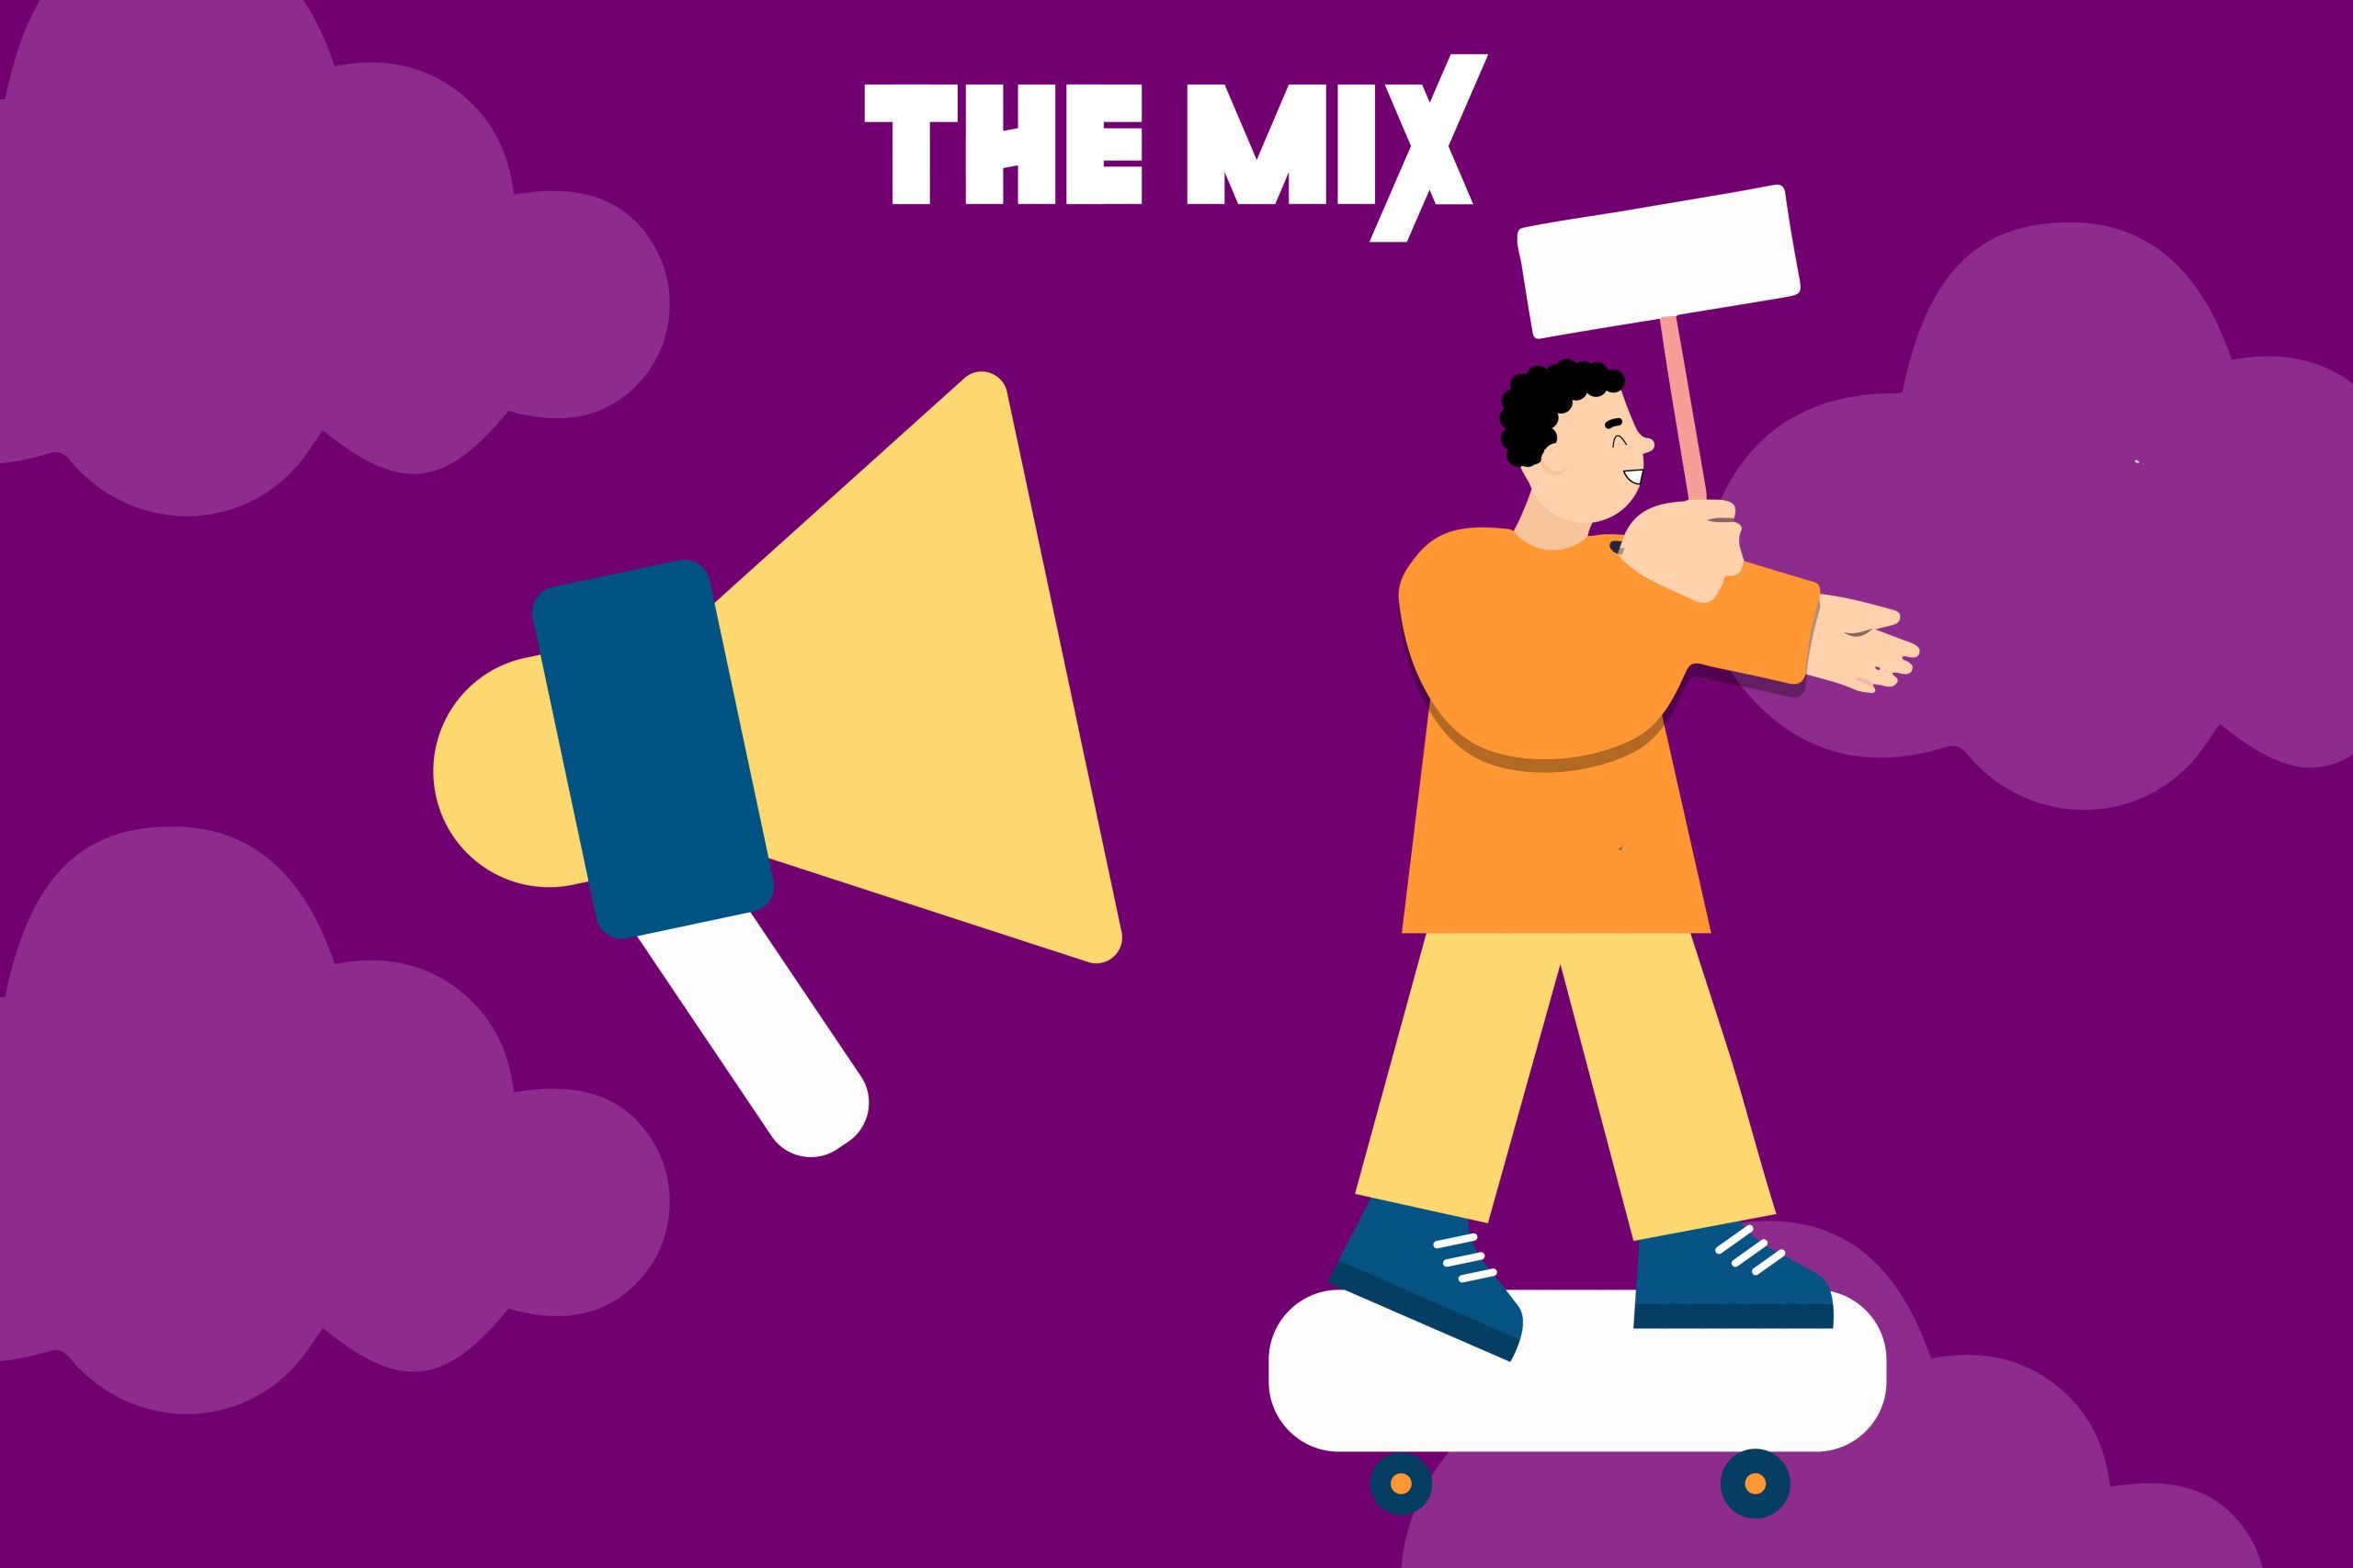 A young person is standing on a skateboard holding a sign against a purple background. There is a megaphone next to them. The illustrations represent a guide to becoming an activist.